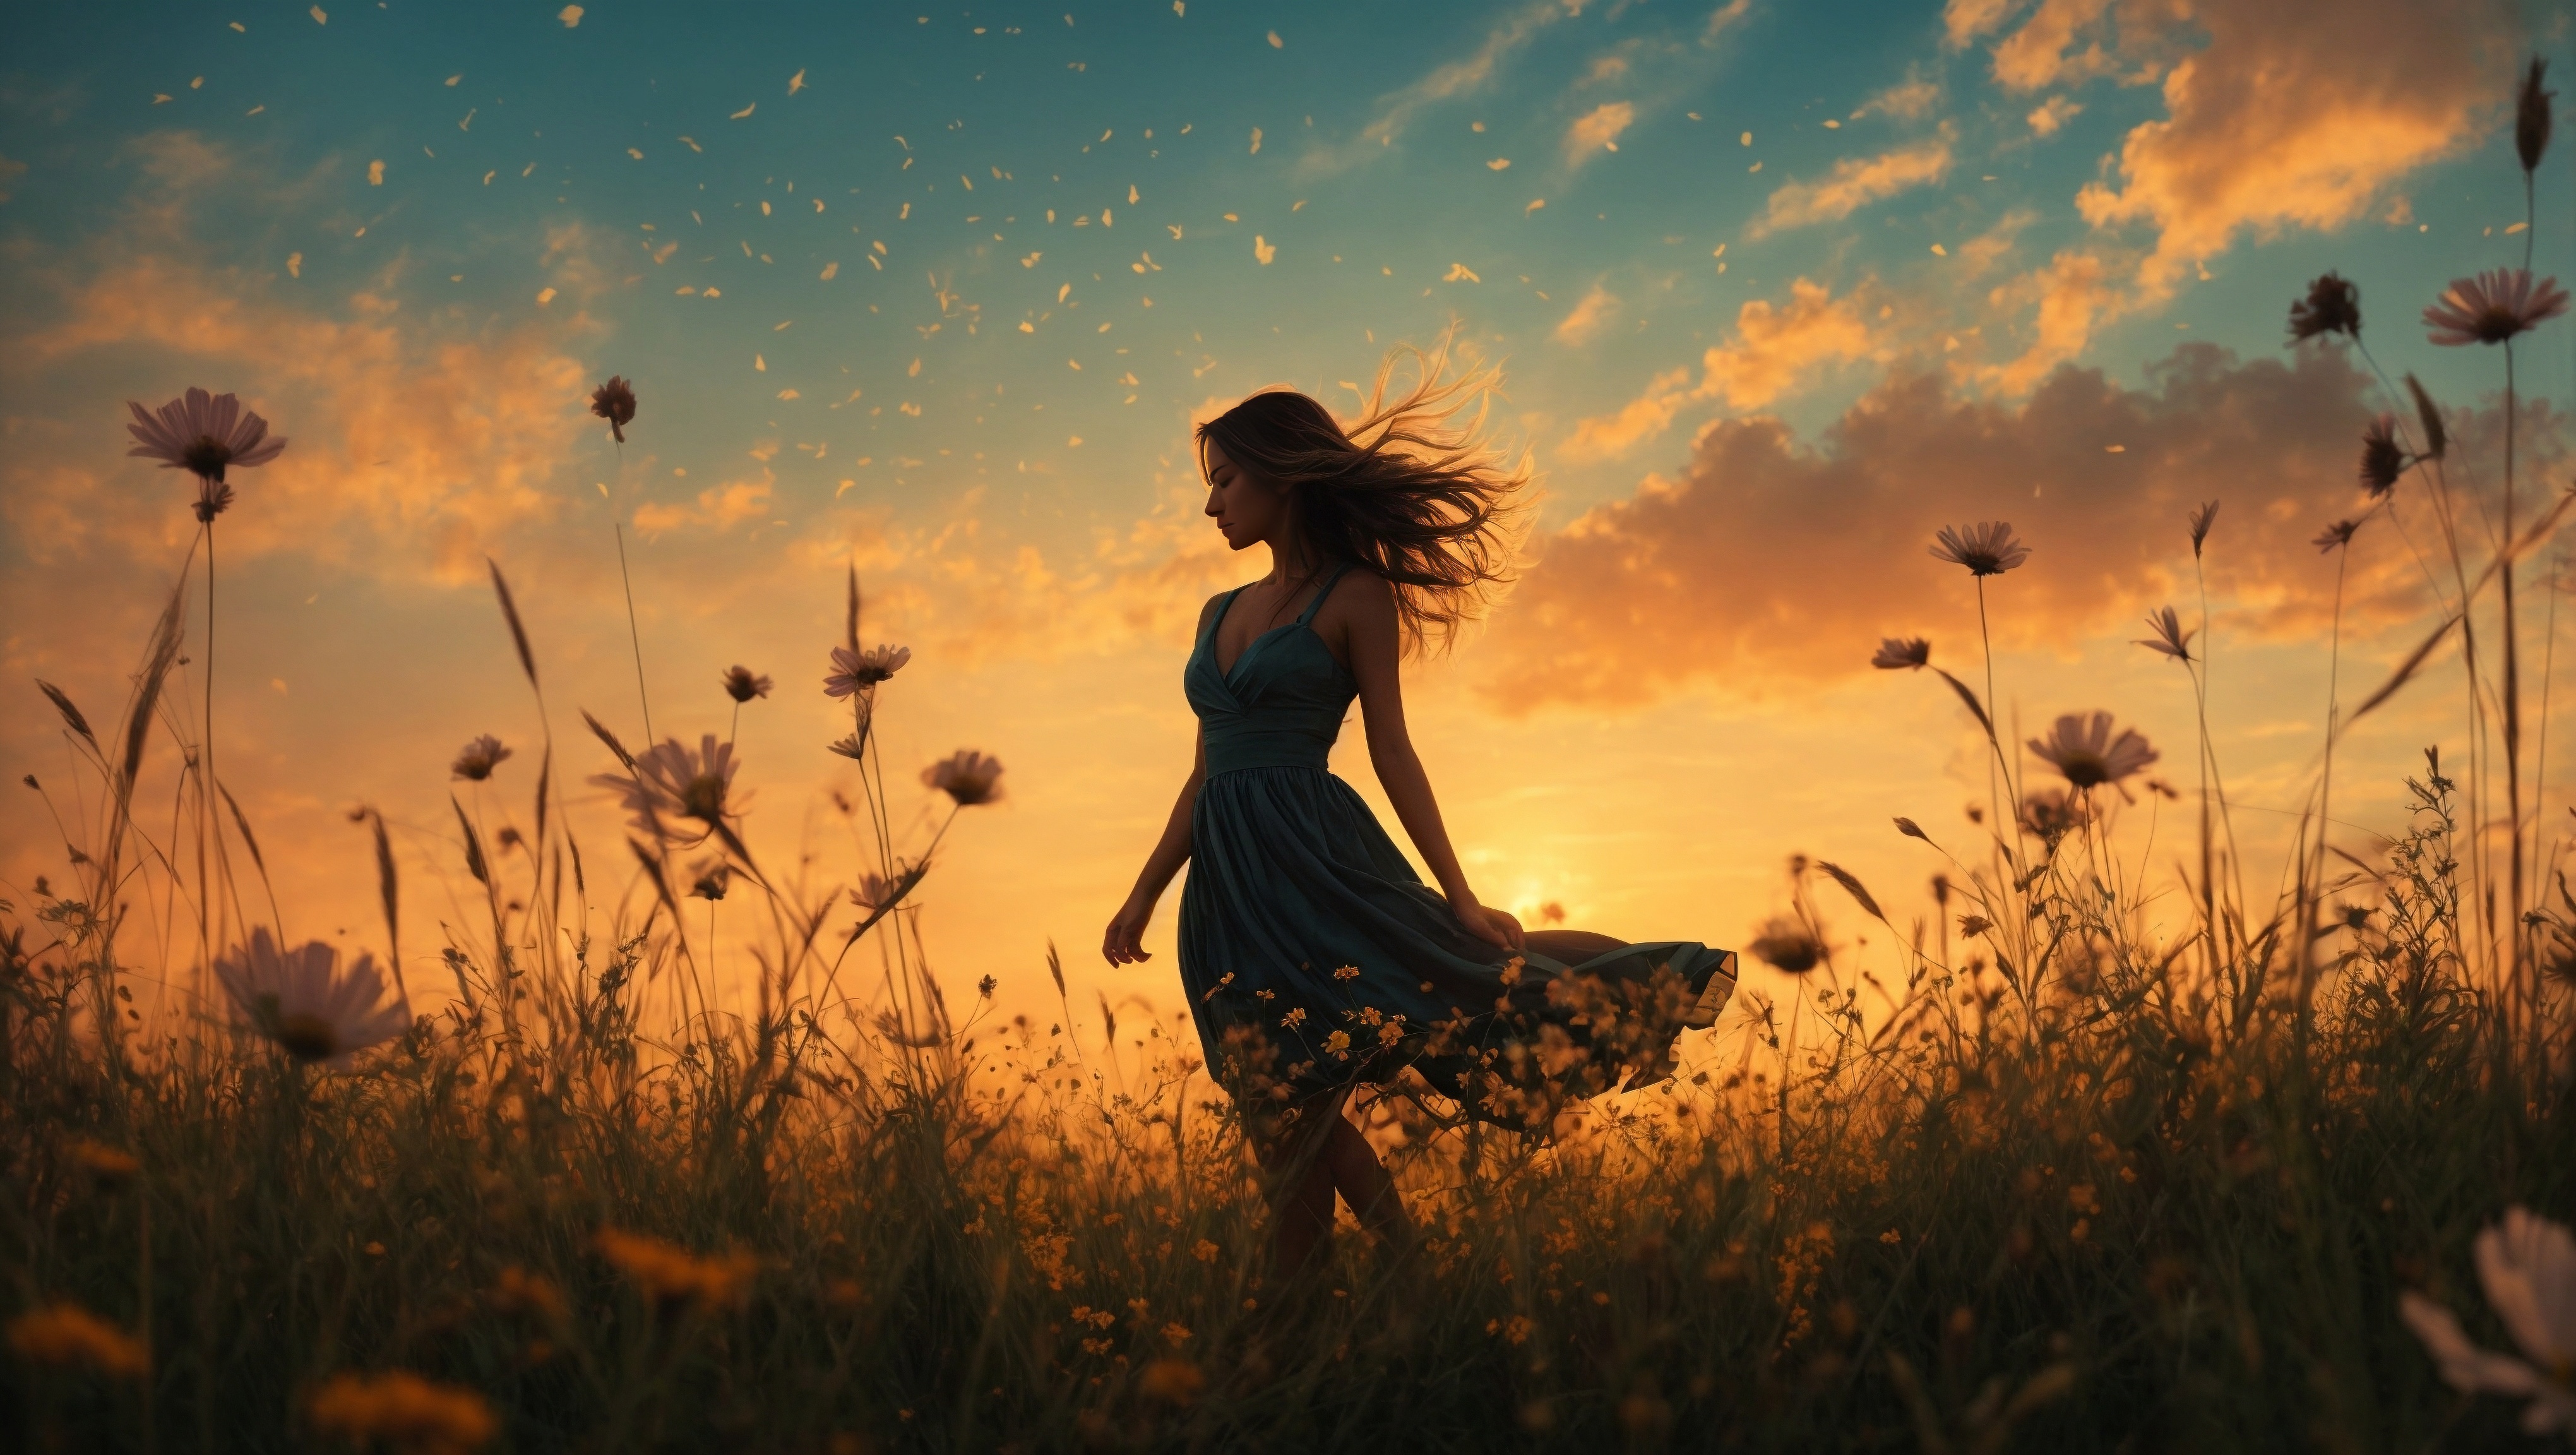 Free photo A girl walks in a field in front of a setting sun